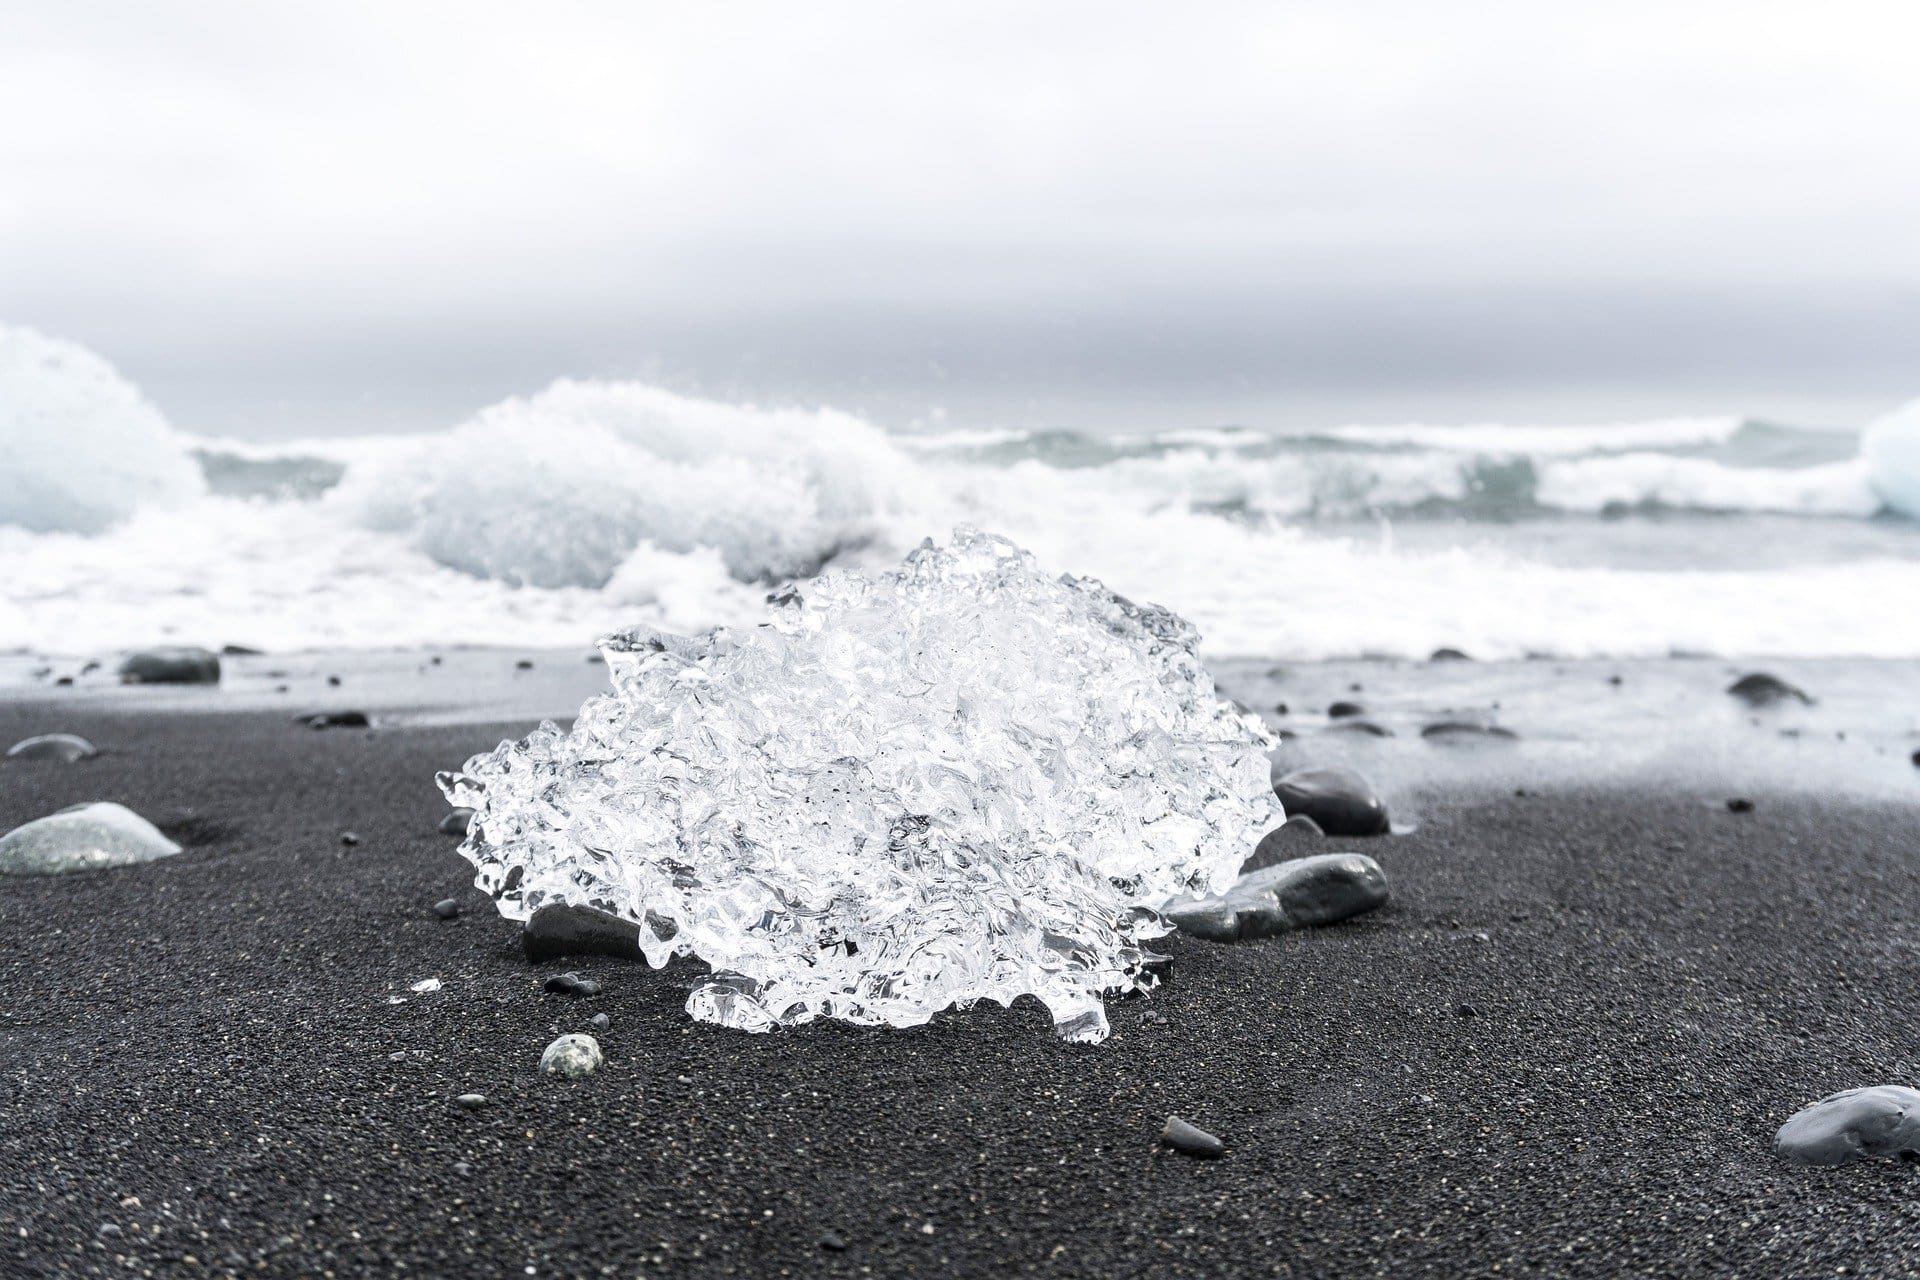 15 black sand beaches that will take your breath away